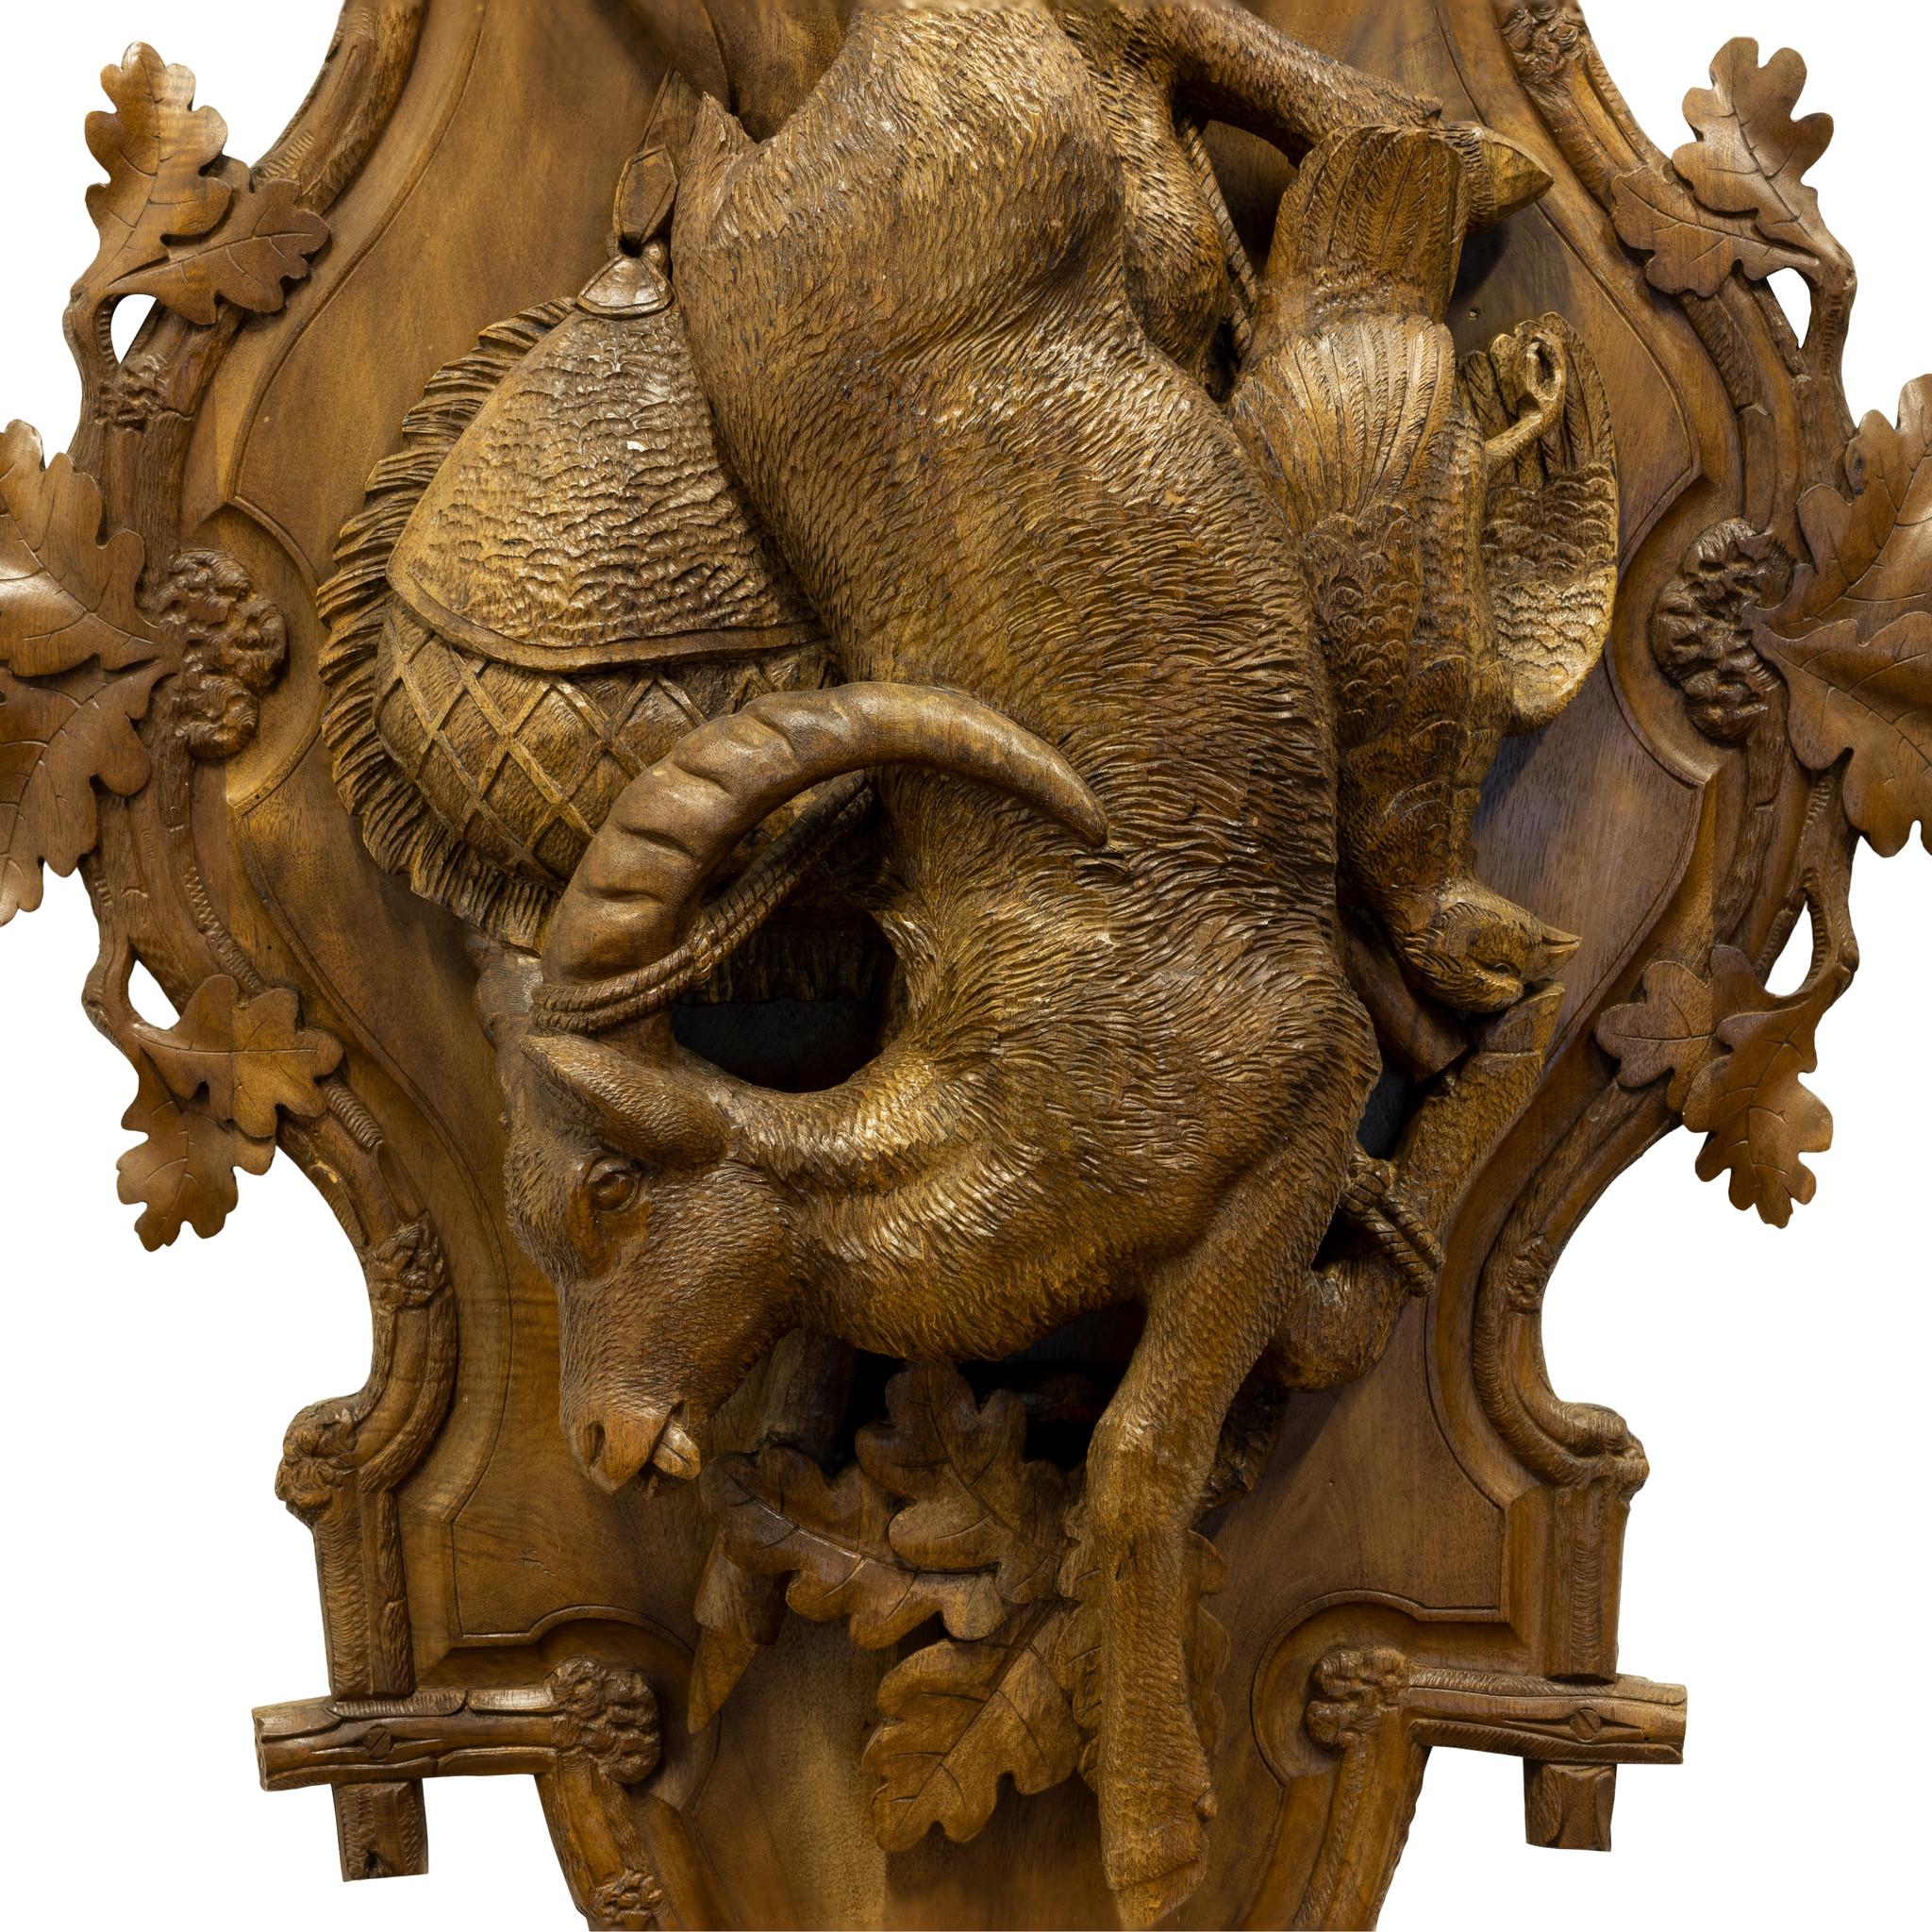 Matched pair of Black Forest linden wood hanging game plaques. One with chamois and grouse, the other red stag and fox. Both complete with rifle and game bags. Part of the Brienz Collection but not published.

PERIOD: Circa 1900
ORIGIN: Swiss
SIZE: